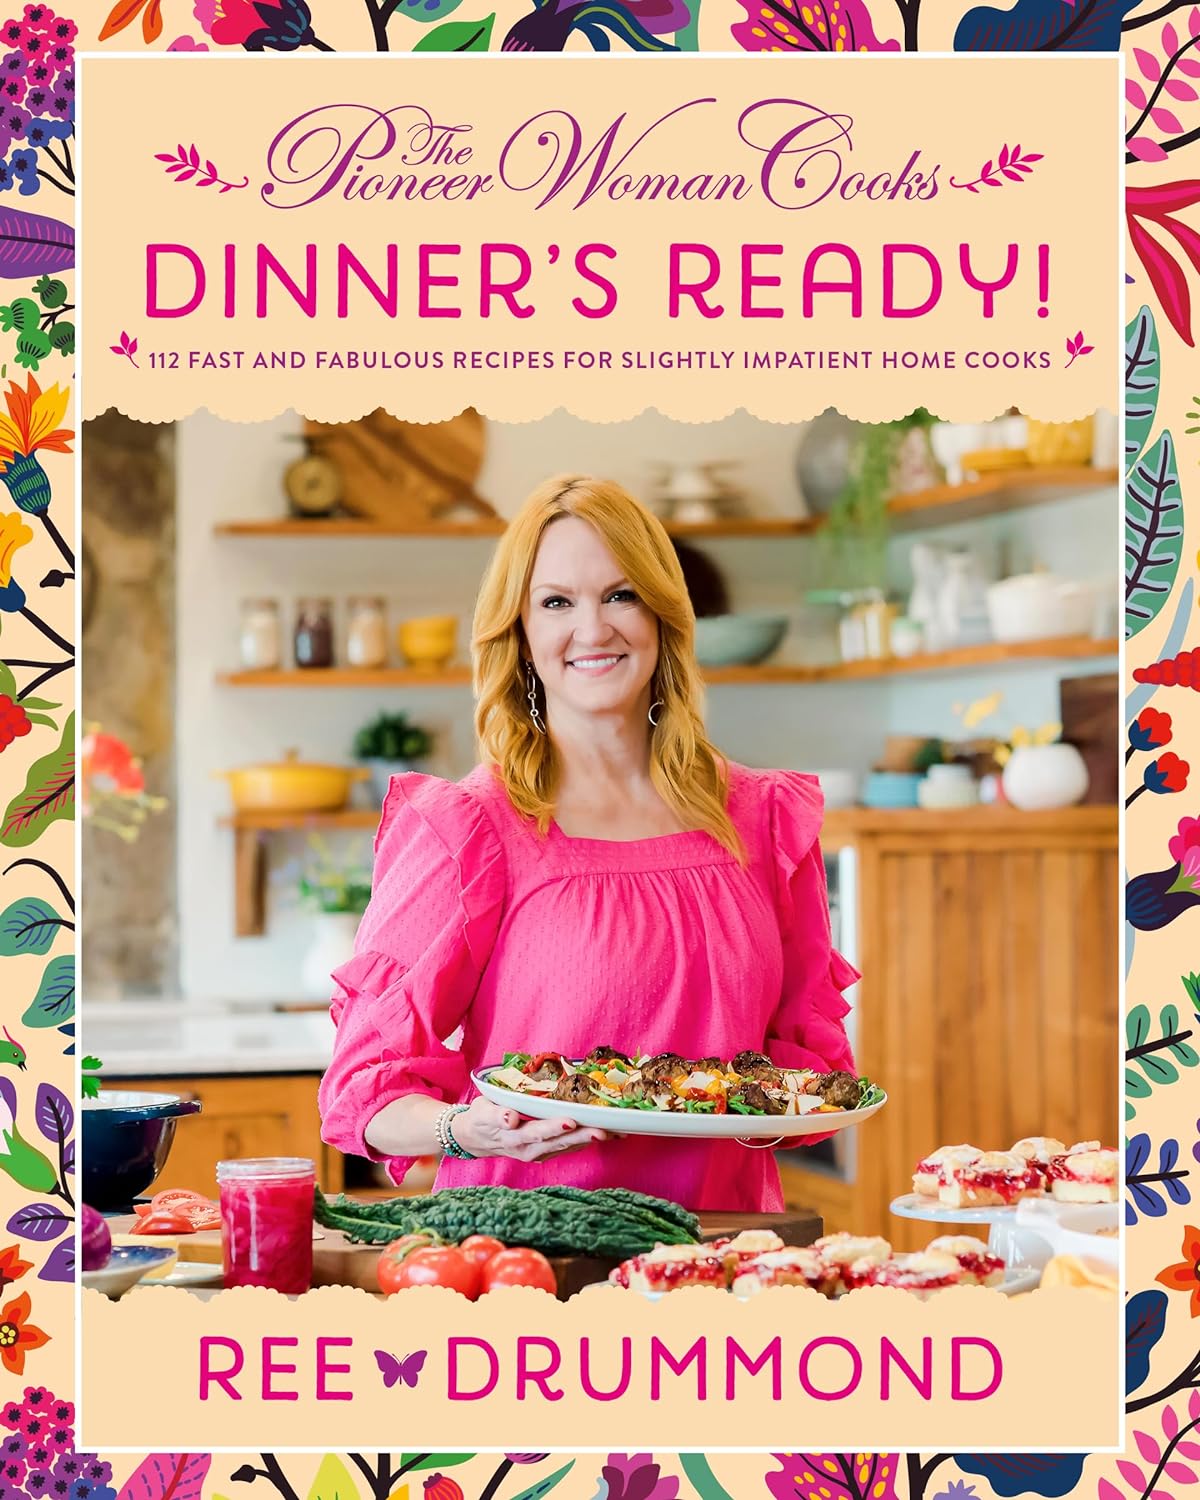 the pioneer woman cooksdinners ready 112 fast and fabulous recipes for slightly impatient home cooks the pioneer woman c 8